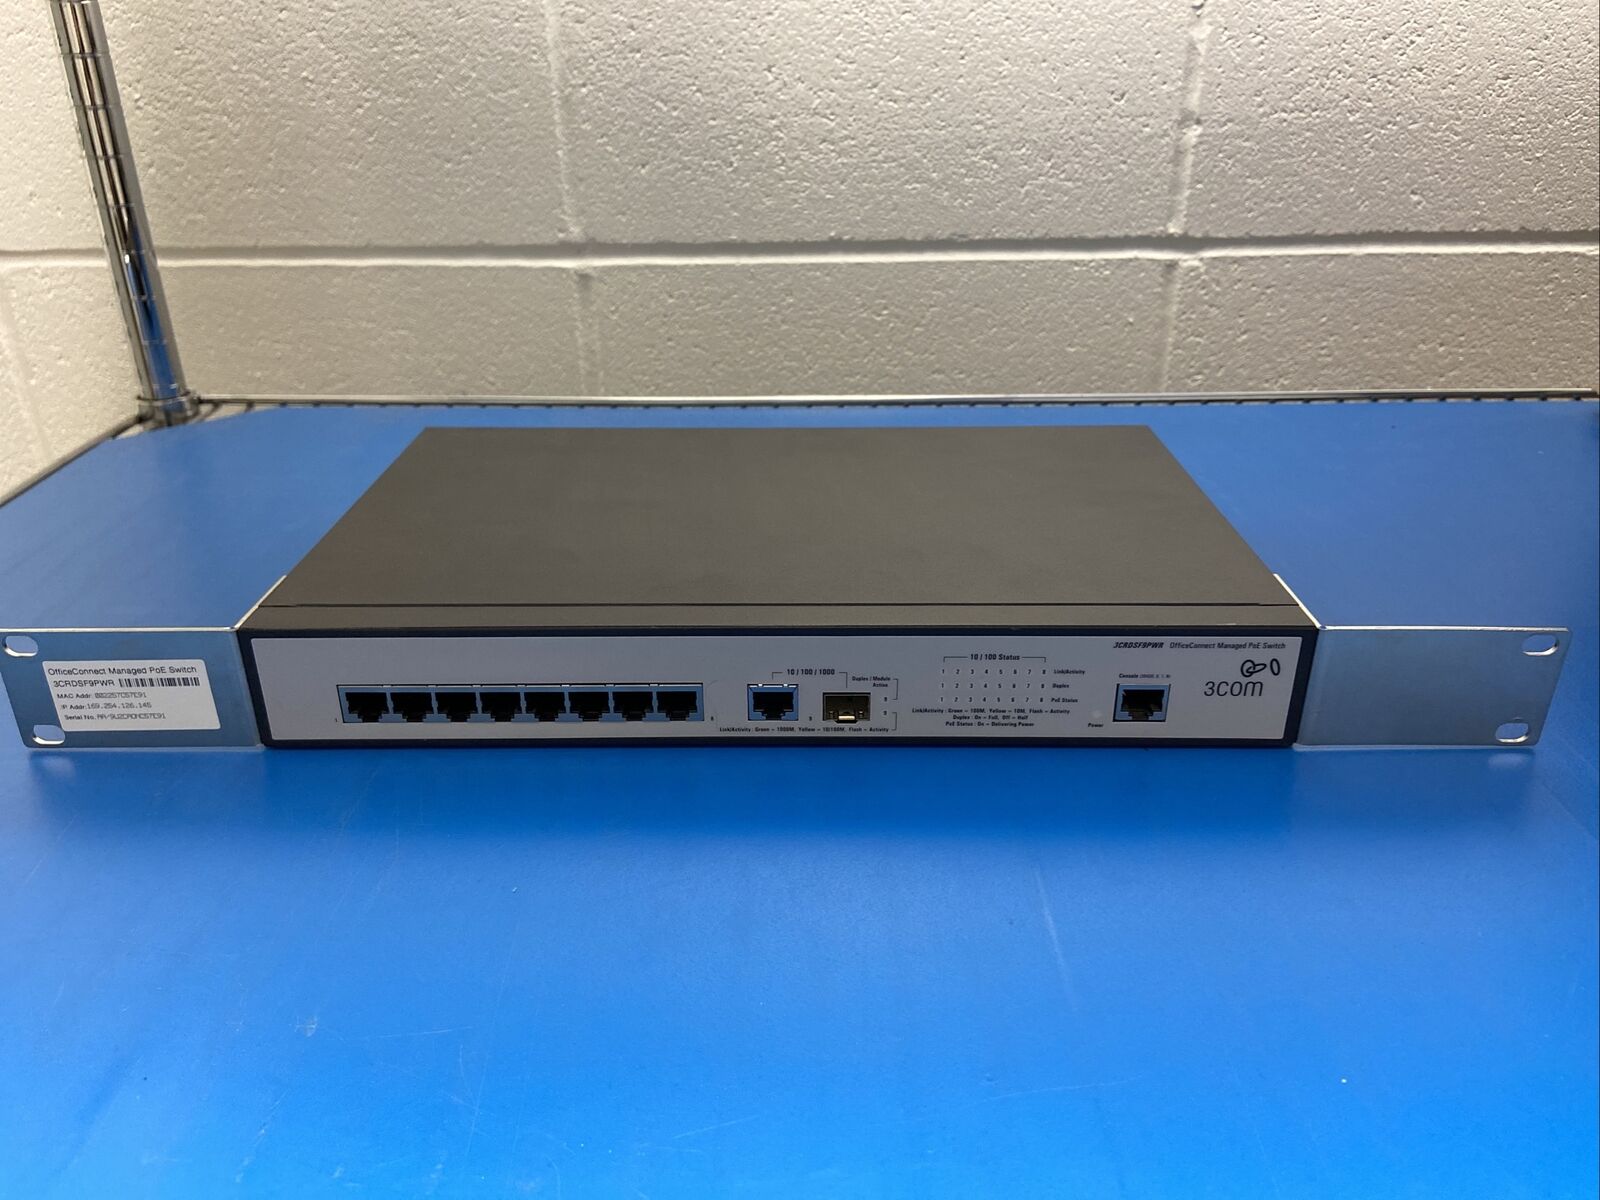 3Com HP 3CRDSF9PWR Office Connect Managed Gigabit 8-Port PoE Switch